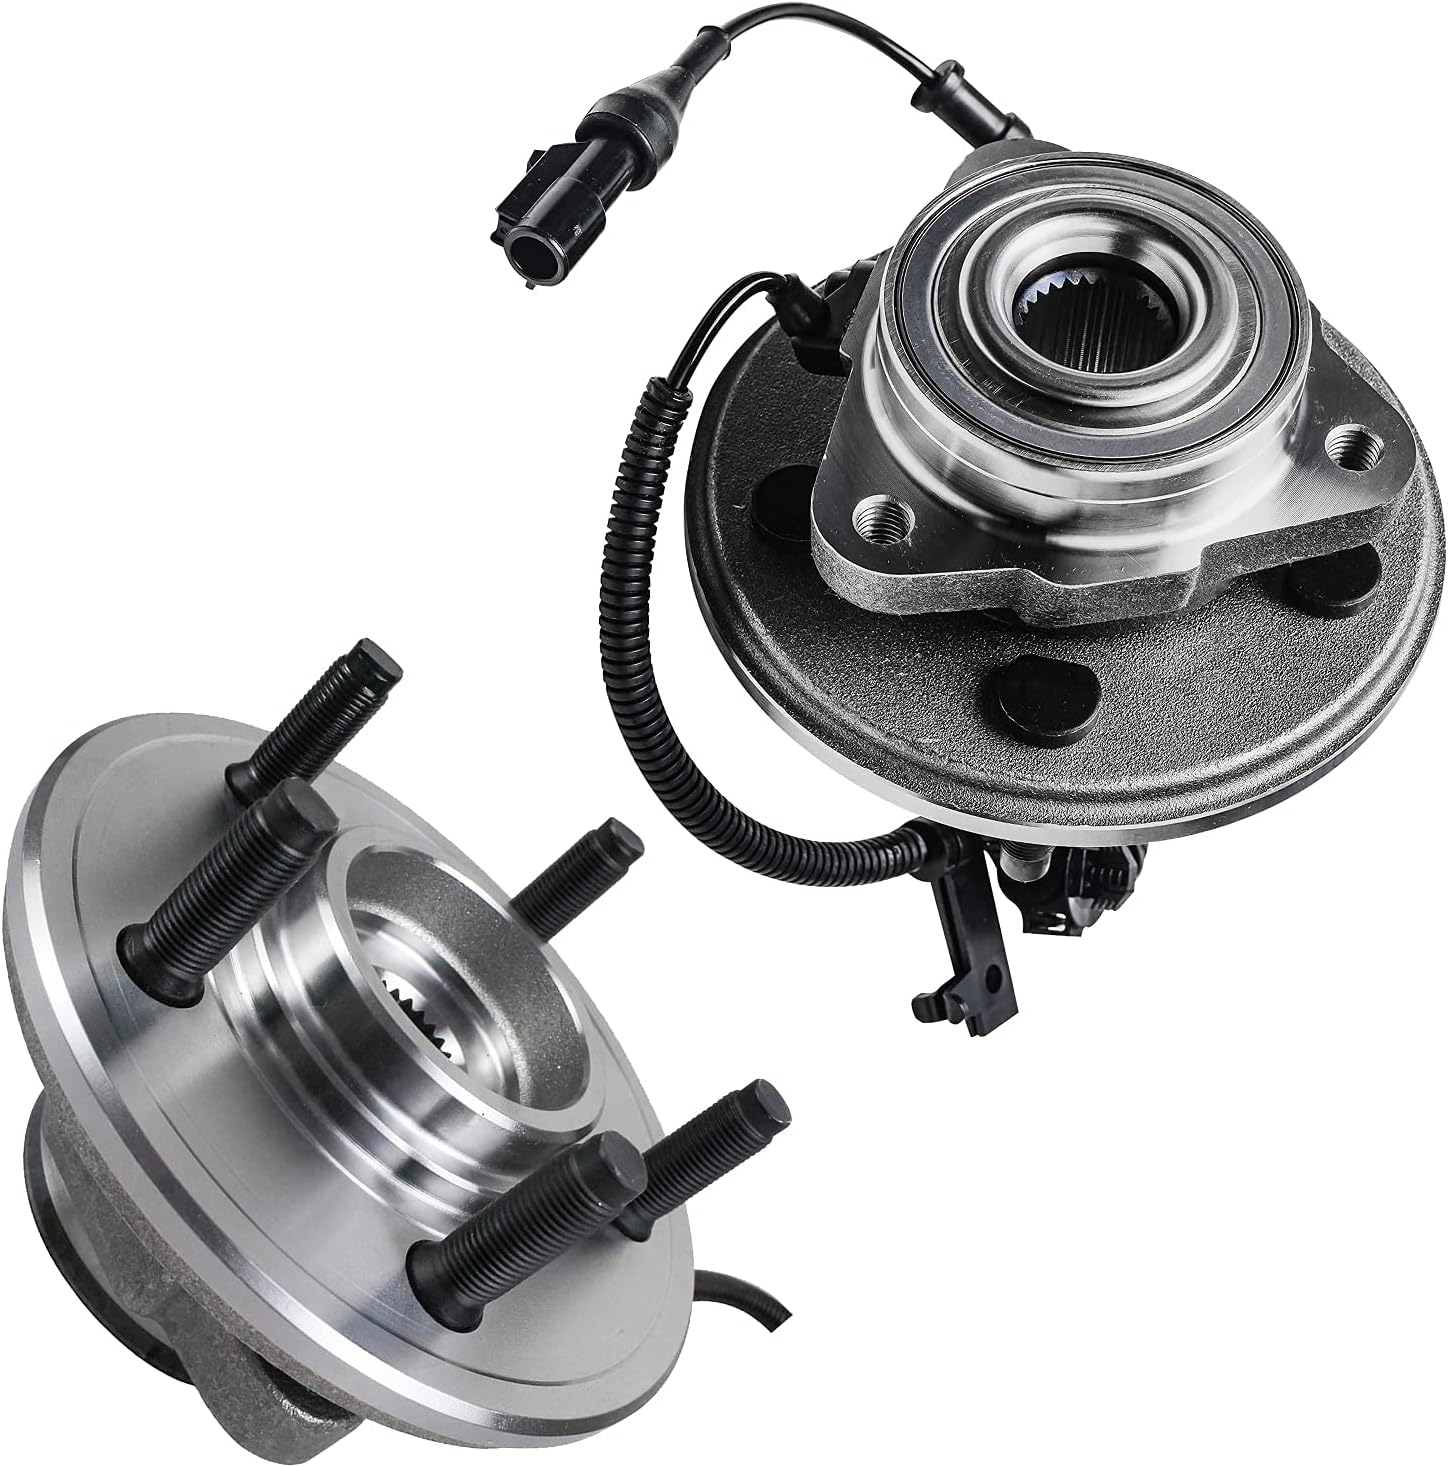 2 Front Wheel Bearing and Hub for 2006-2010 Ford Explorer Mercury Mountaineer